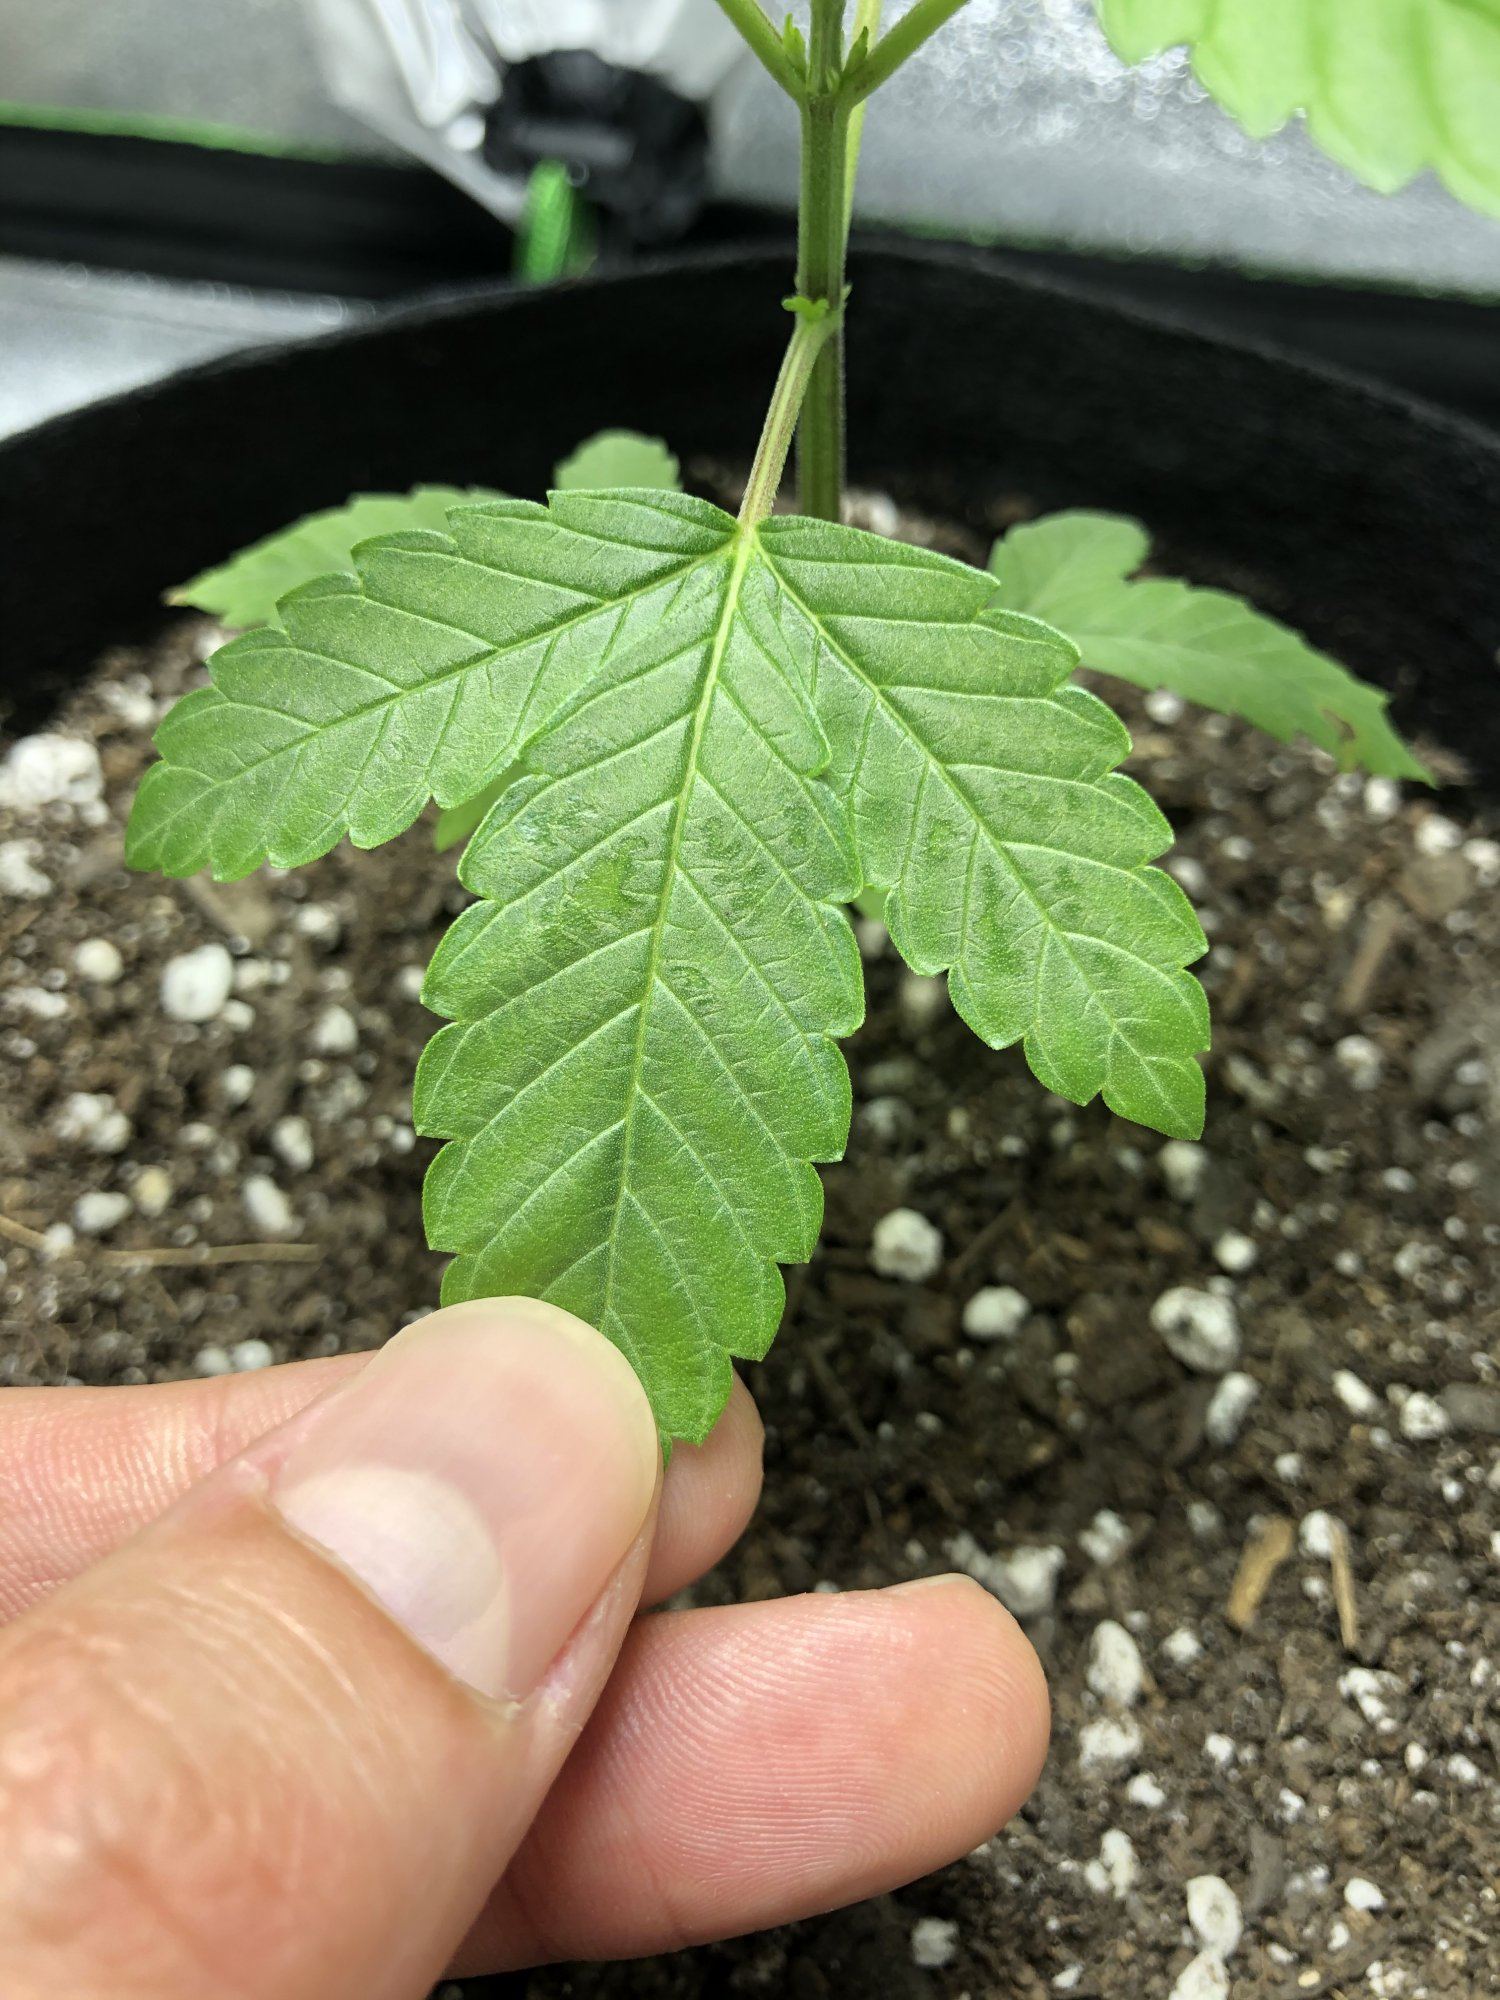 Any ideas on what this leaf damage could be 2